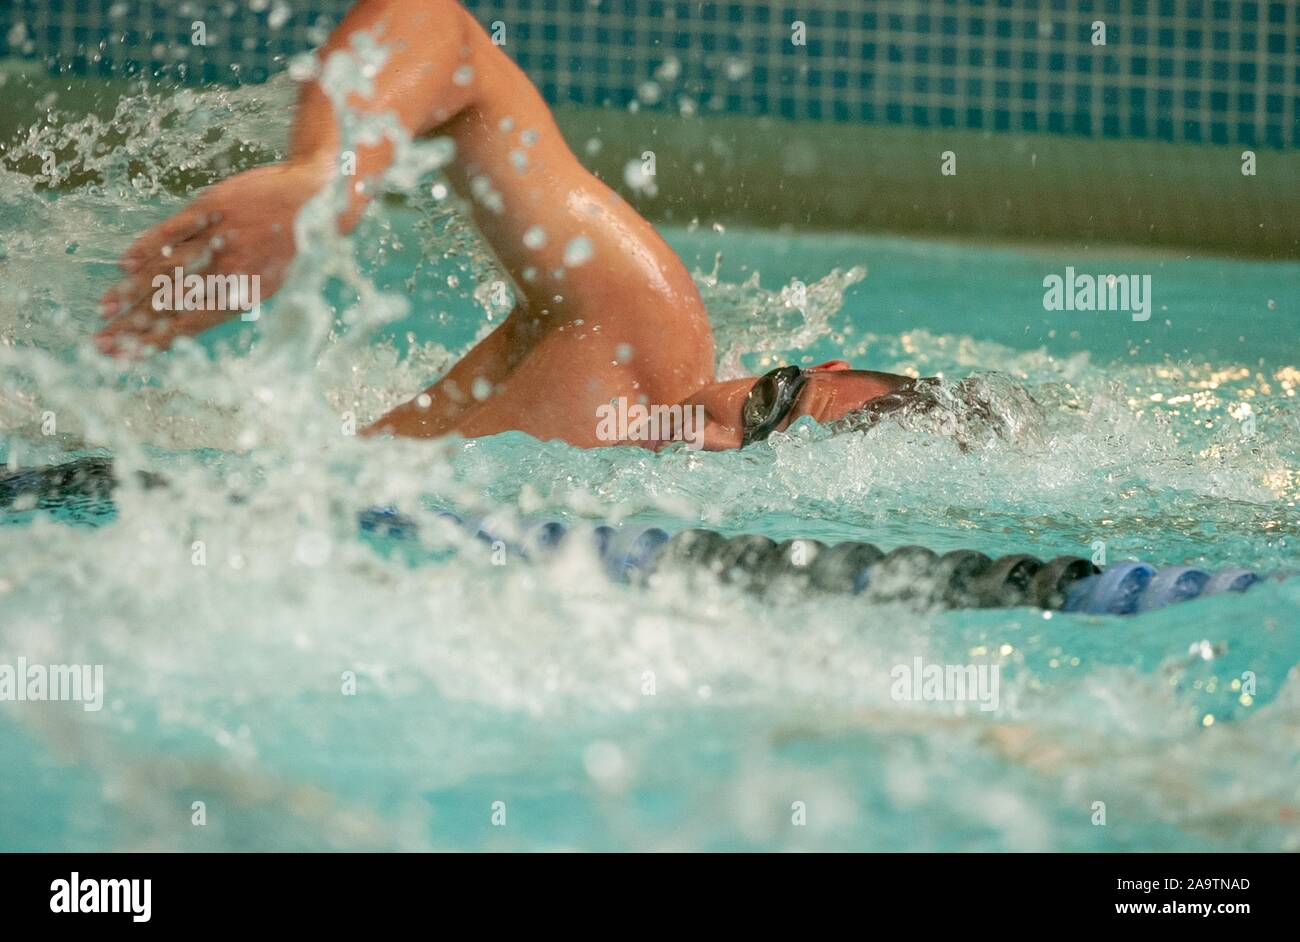 Obscured profile shot of a Johns Hopkins University Men's Swim team member, from the chest up, moving through the water while performing a sidestroke, January 14, 2005. From the Homewood Photography Collection. () Stock Photo